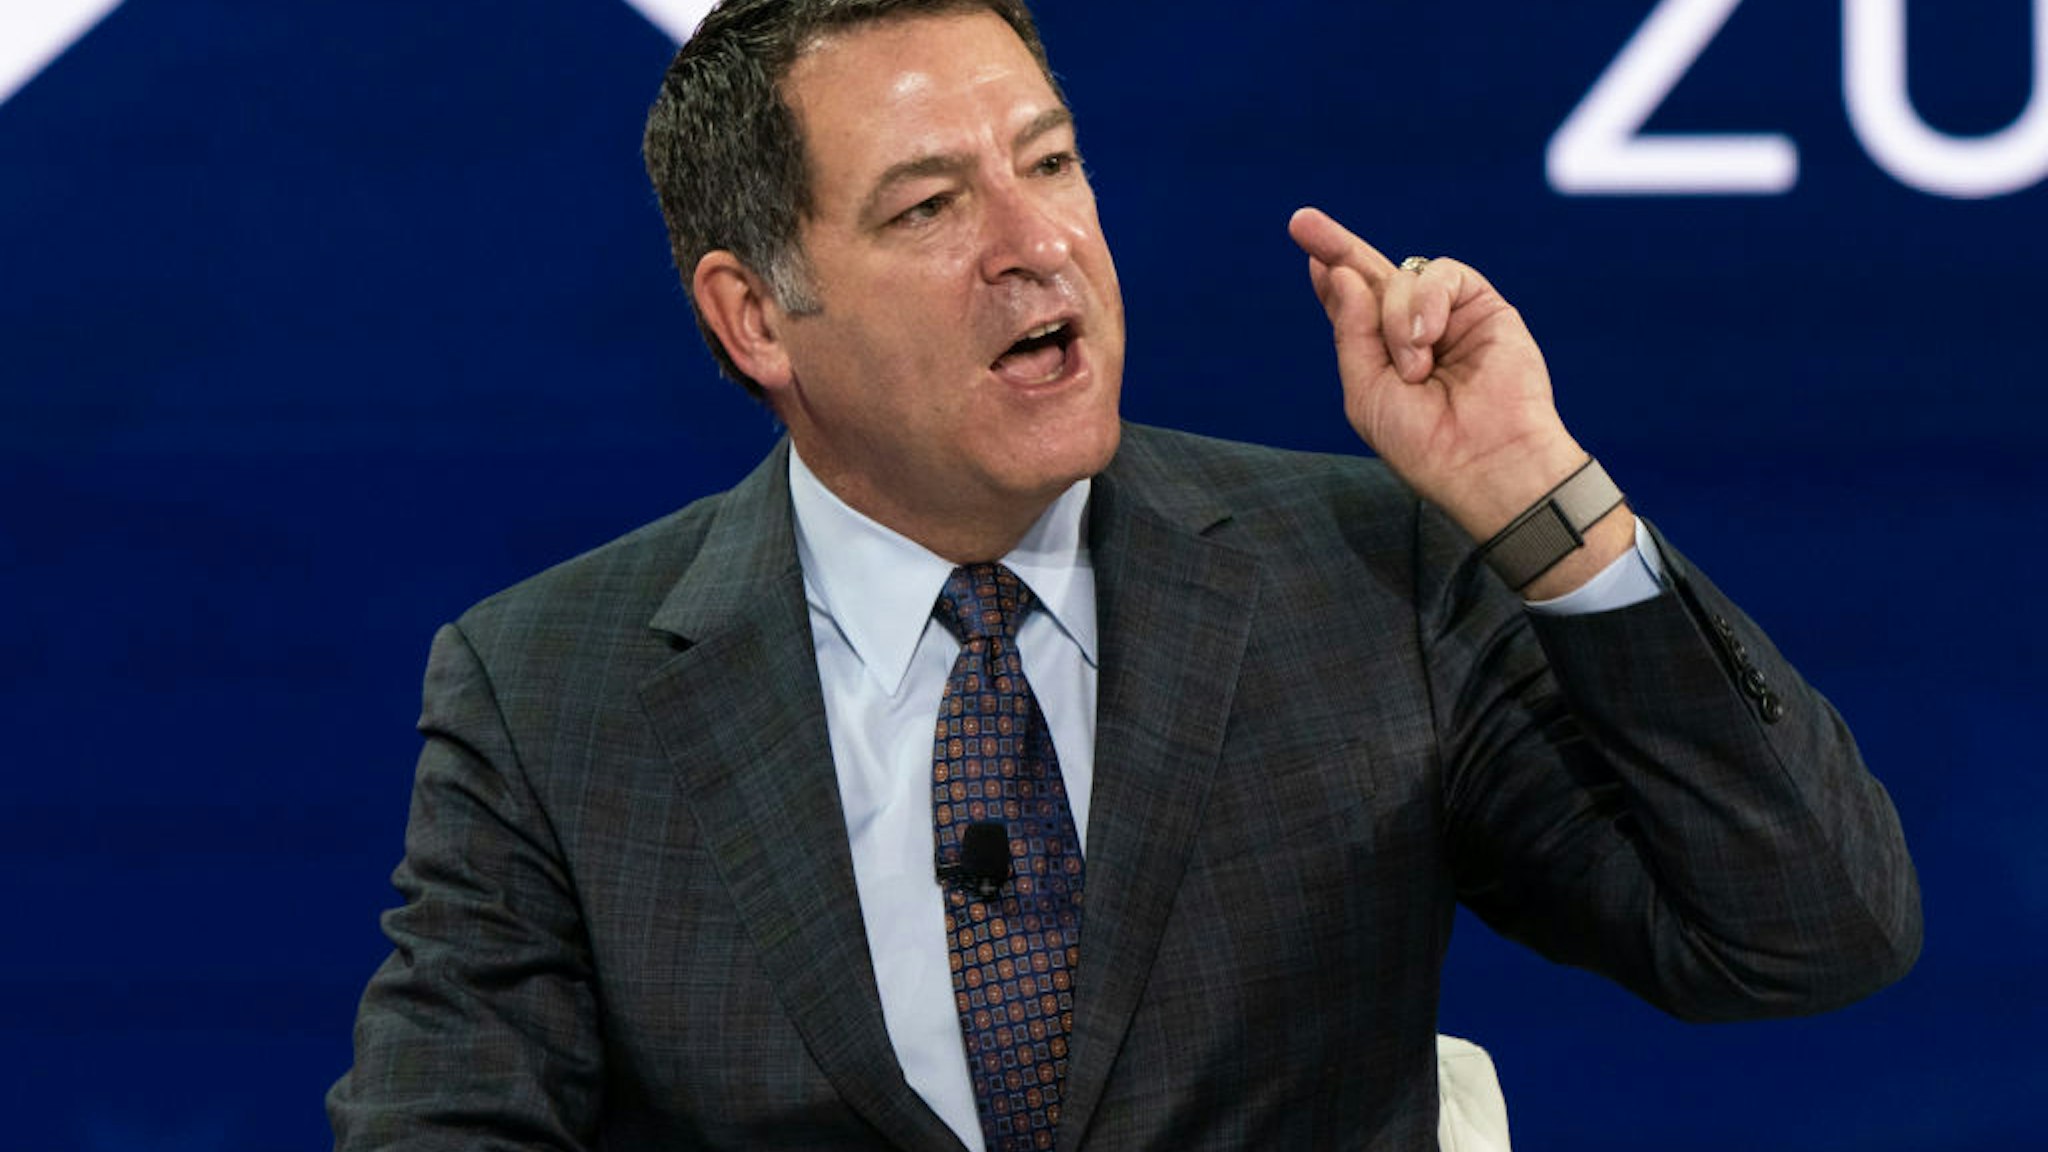 Representative Mark Green, a Republican from Tennessee, speaks during a panel at the Conservative Political Action Conference (CPAC) in Orlando, Florida, U.S., on Saturday, Feb. 27, 2021.